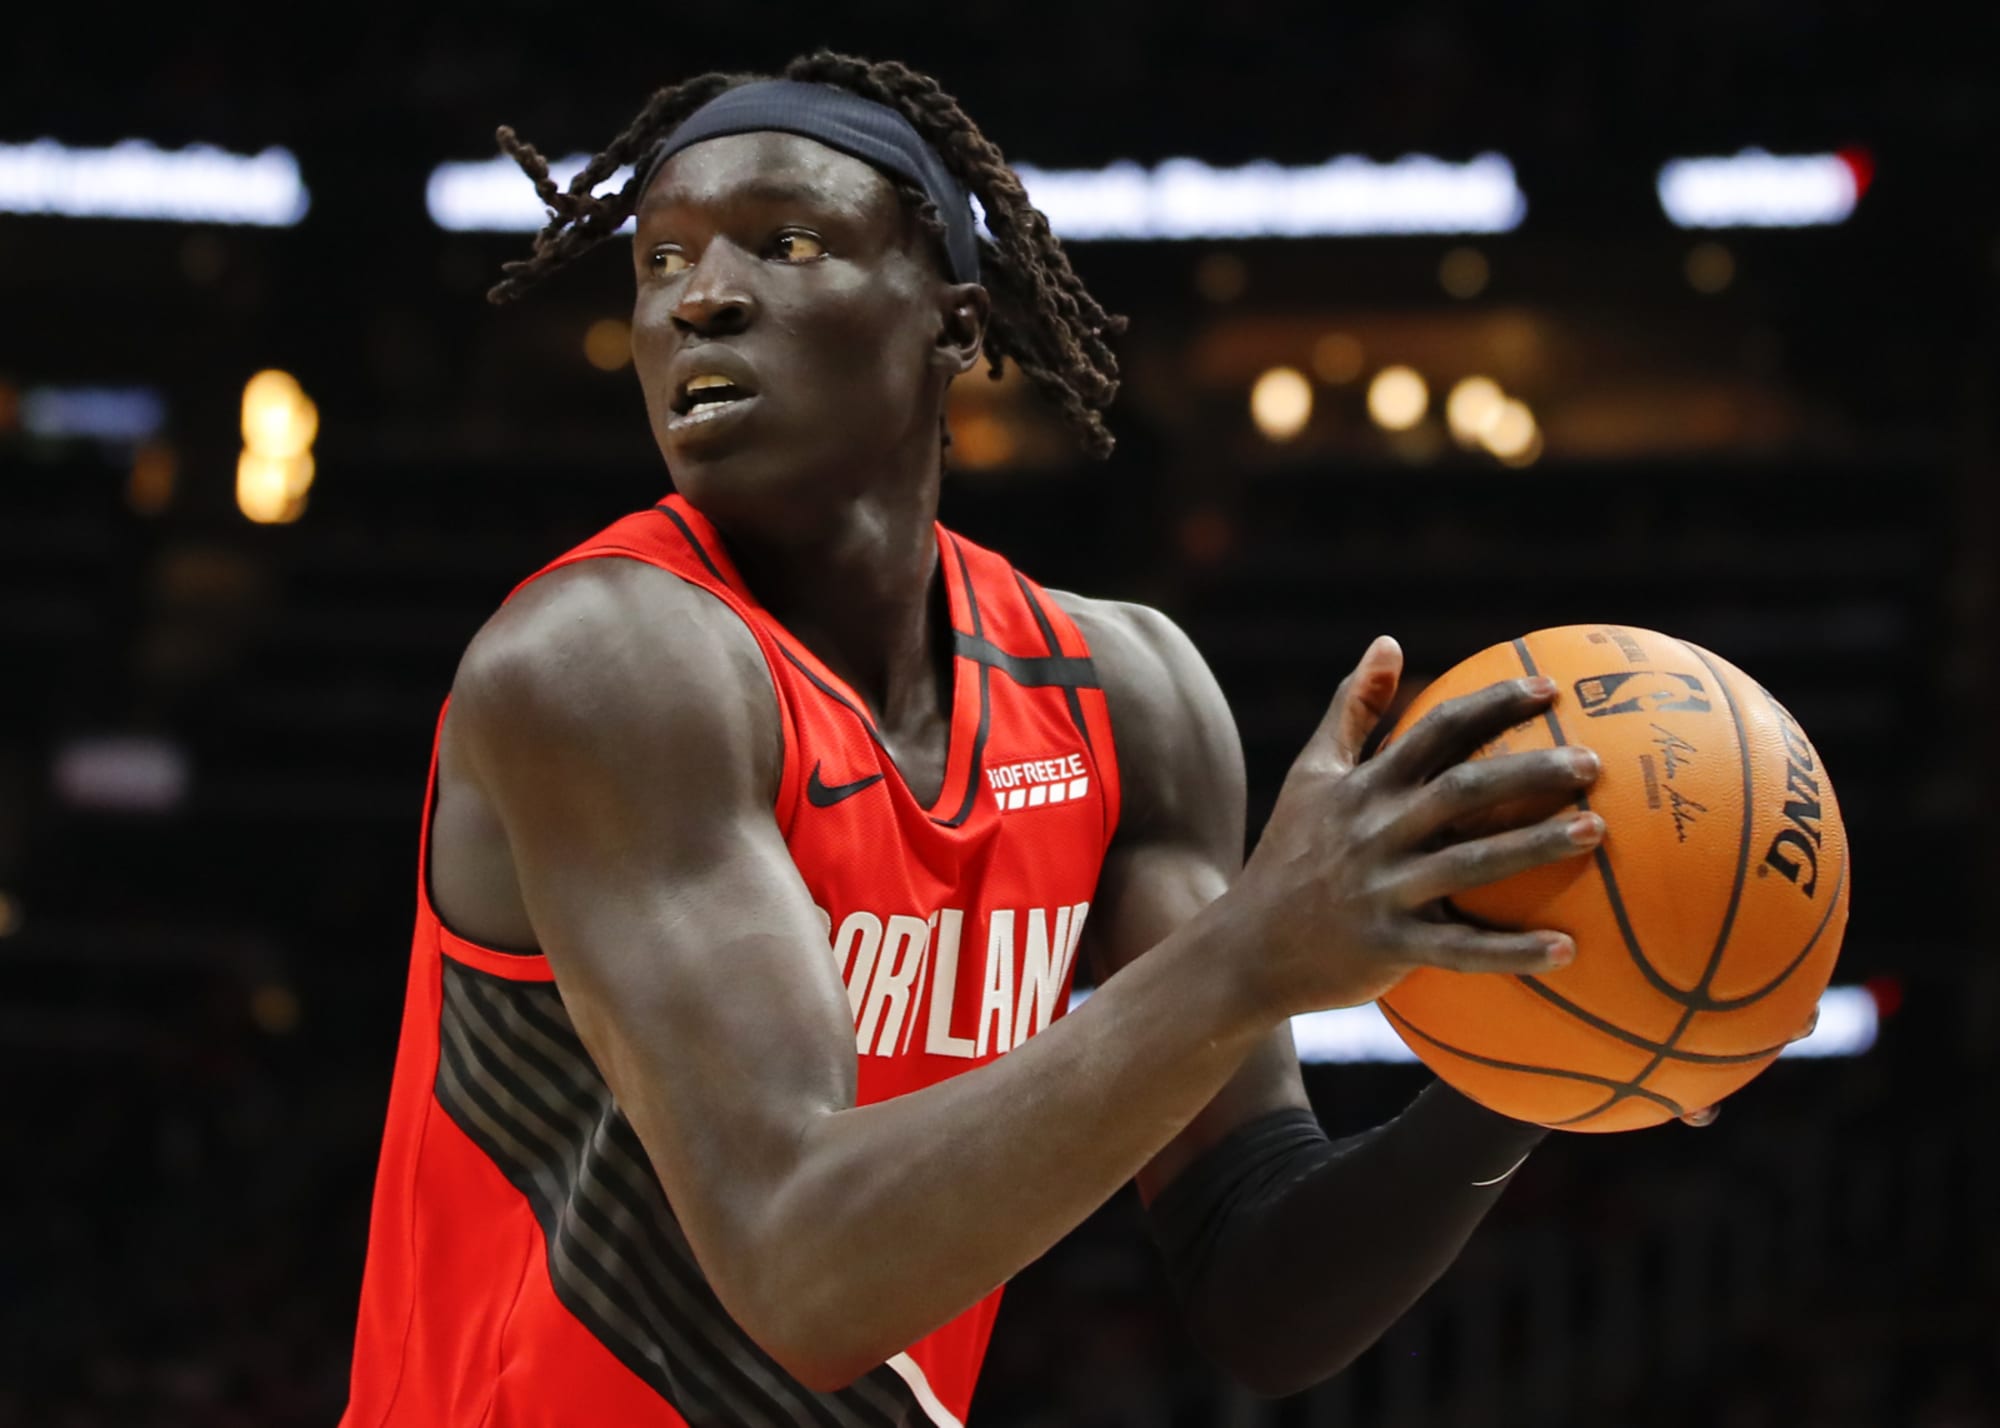 Wenyen Gabriel shows some offensive prowess but is still